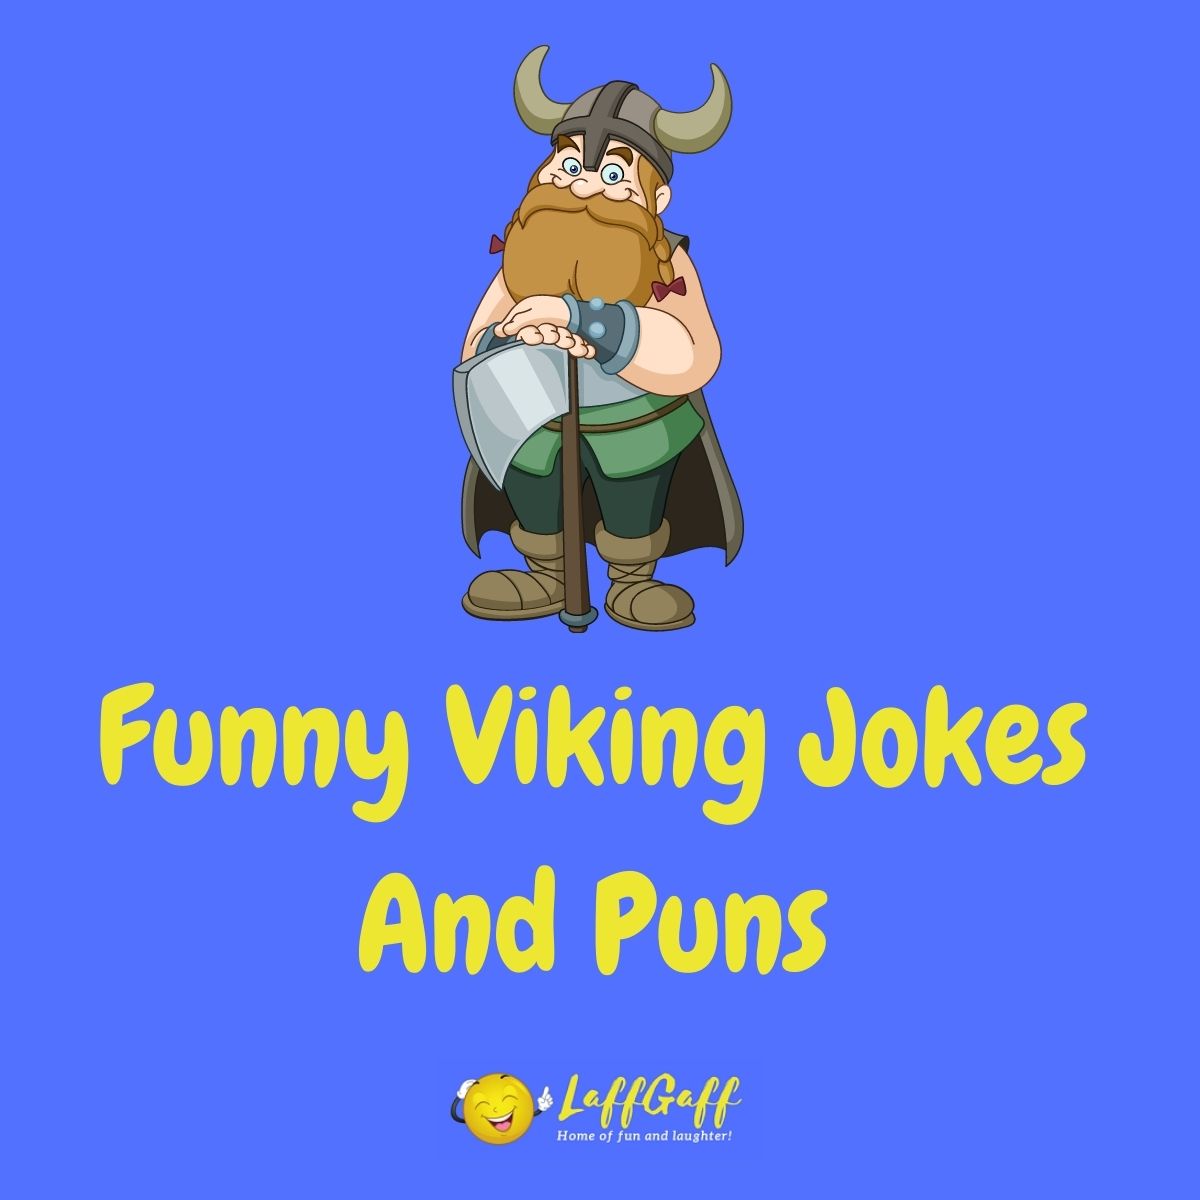 Featured image for a page of funny Viking jokes and puns.